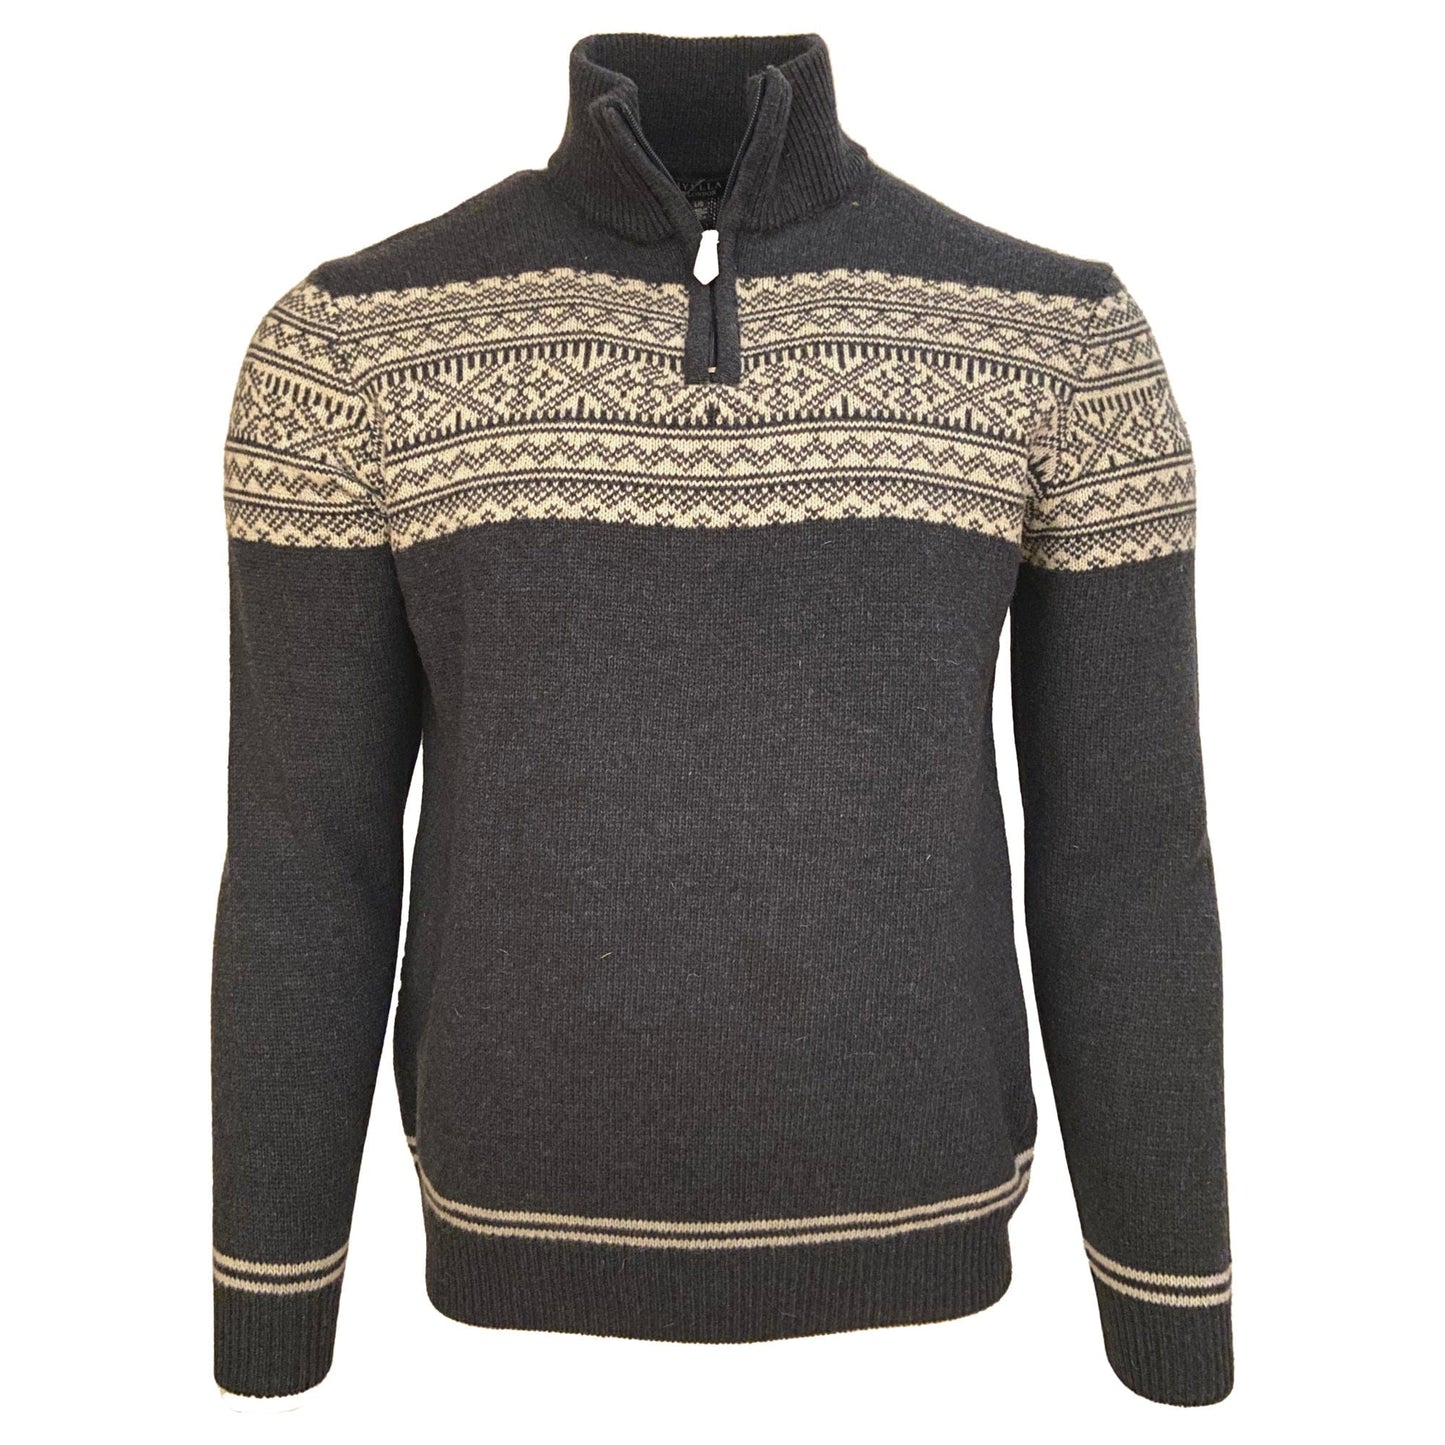 Viyella Elevate Your Winter Wardrobe with a Stylish Steel Blue Quarter-Zip Mockneck Fair Isle Sweater: Made In Italy for Unmatched Quality